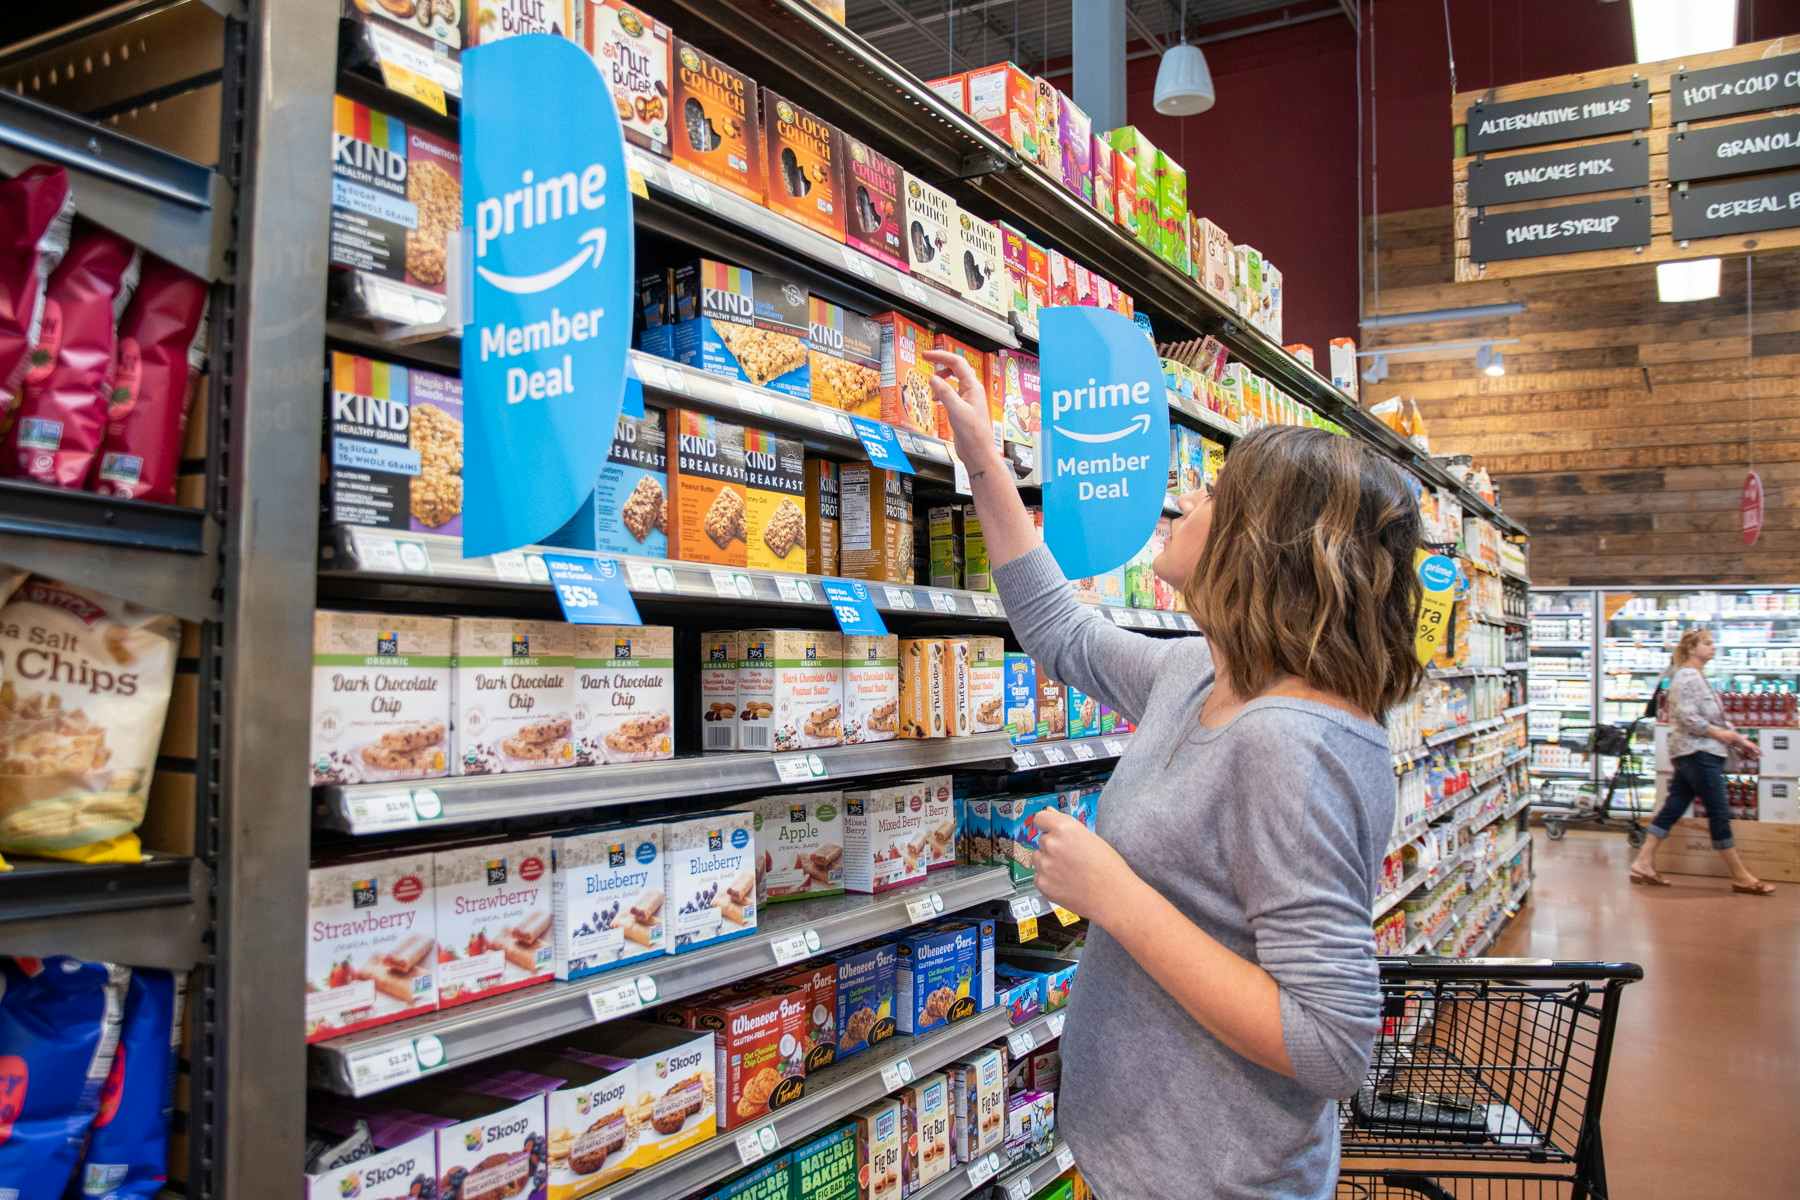 Woman shopping for products with Blue Prime Member Deal tags in Whole Foods.